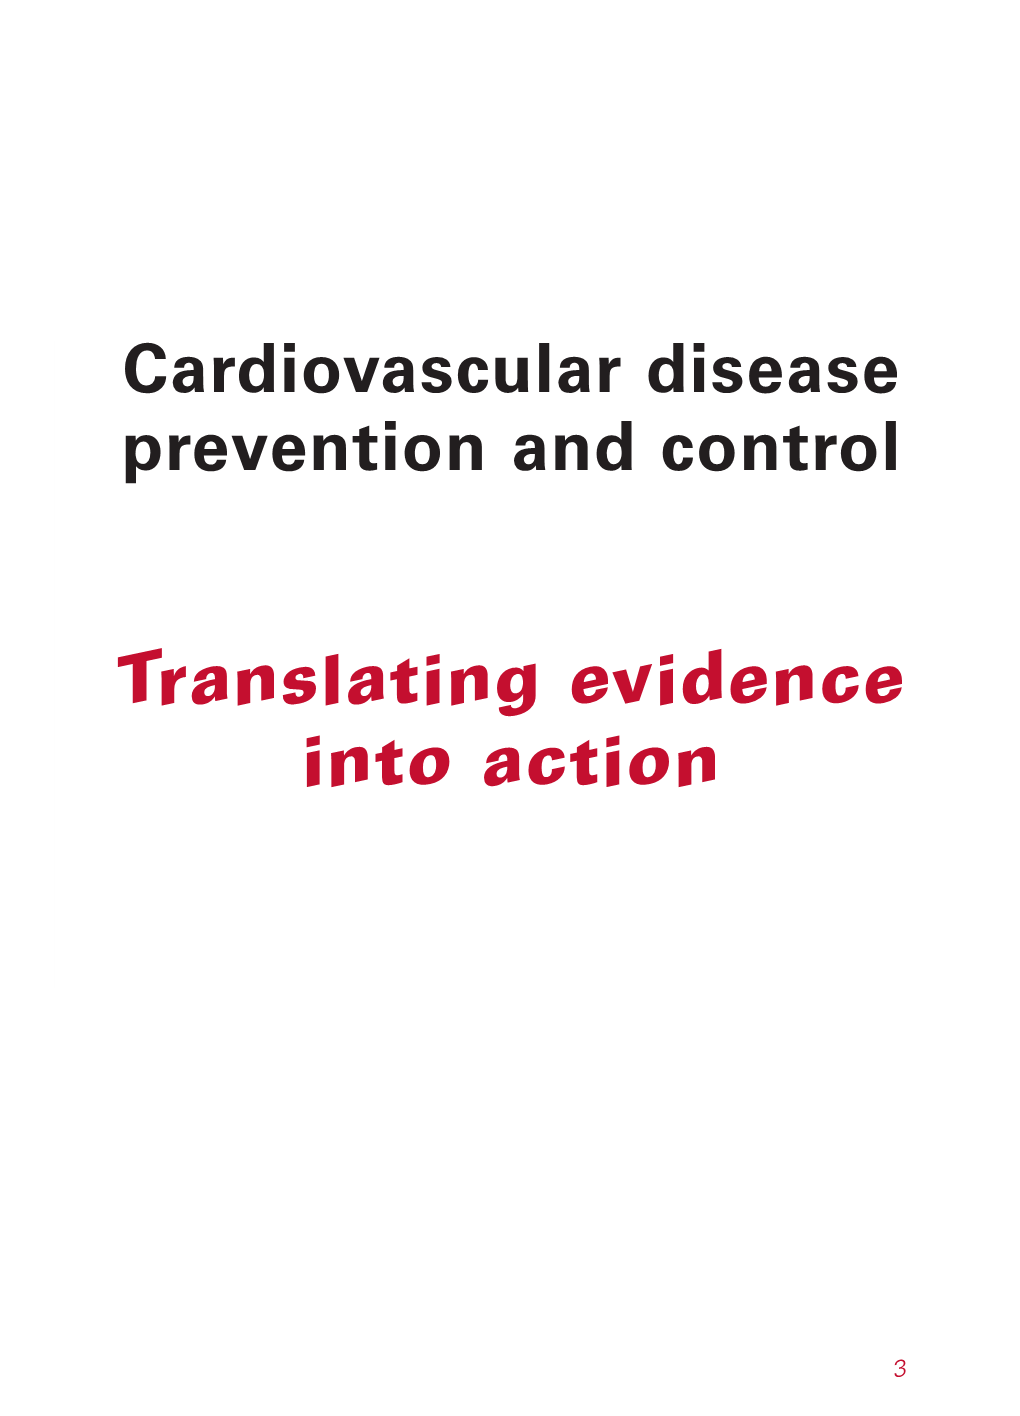 Cardiovascular Disease Prevention and Control Translating Evidence